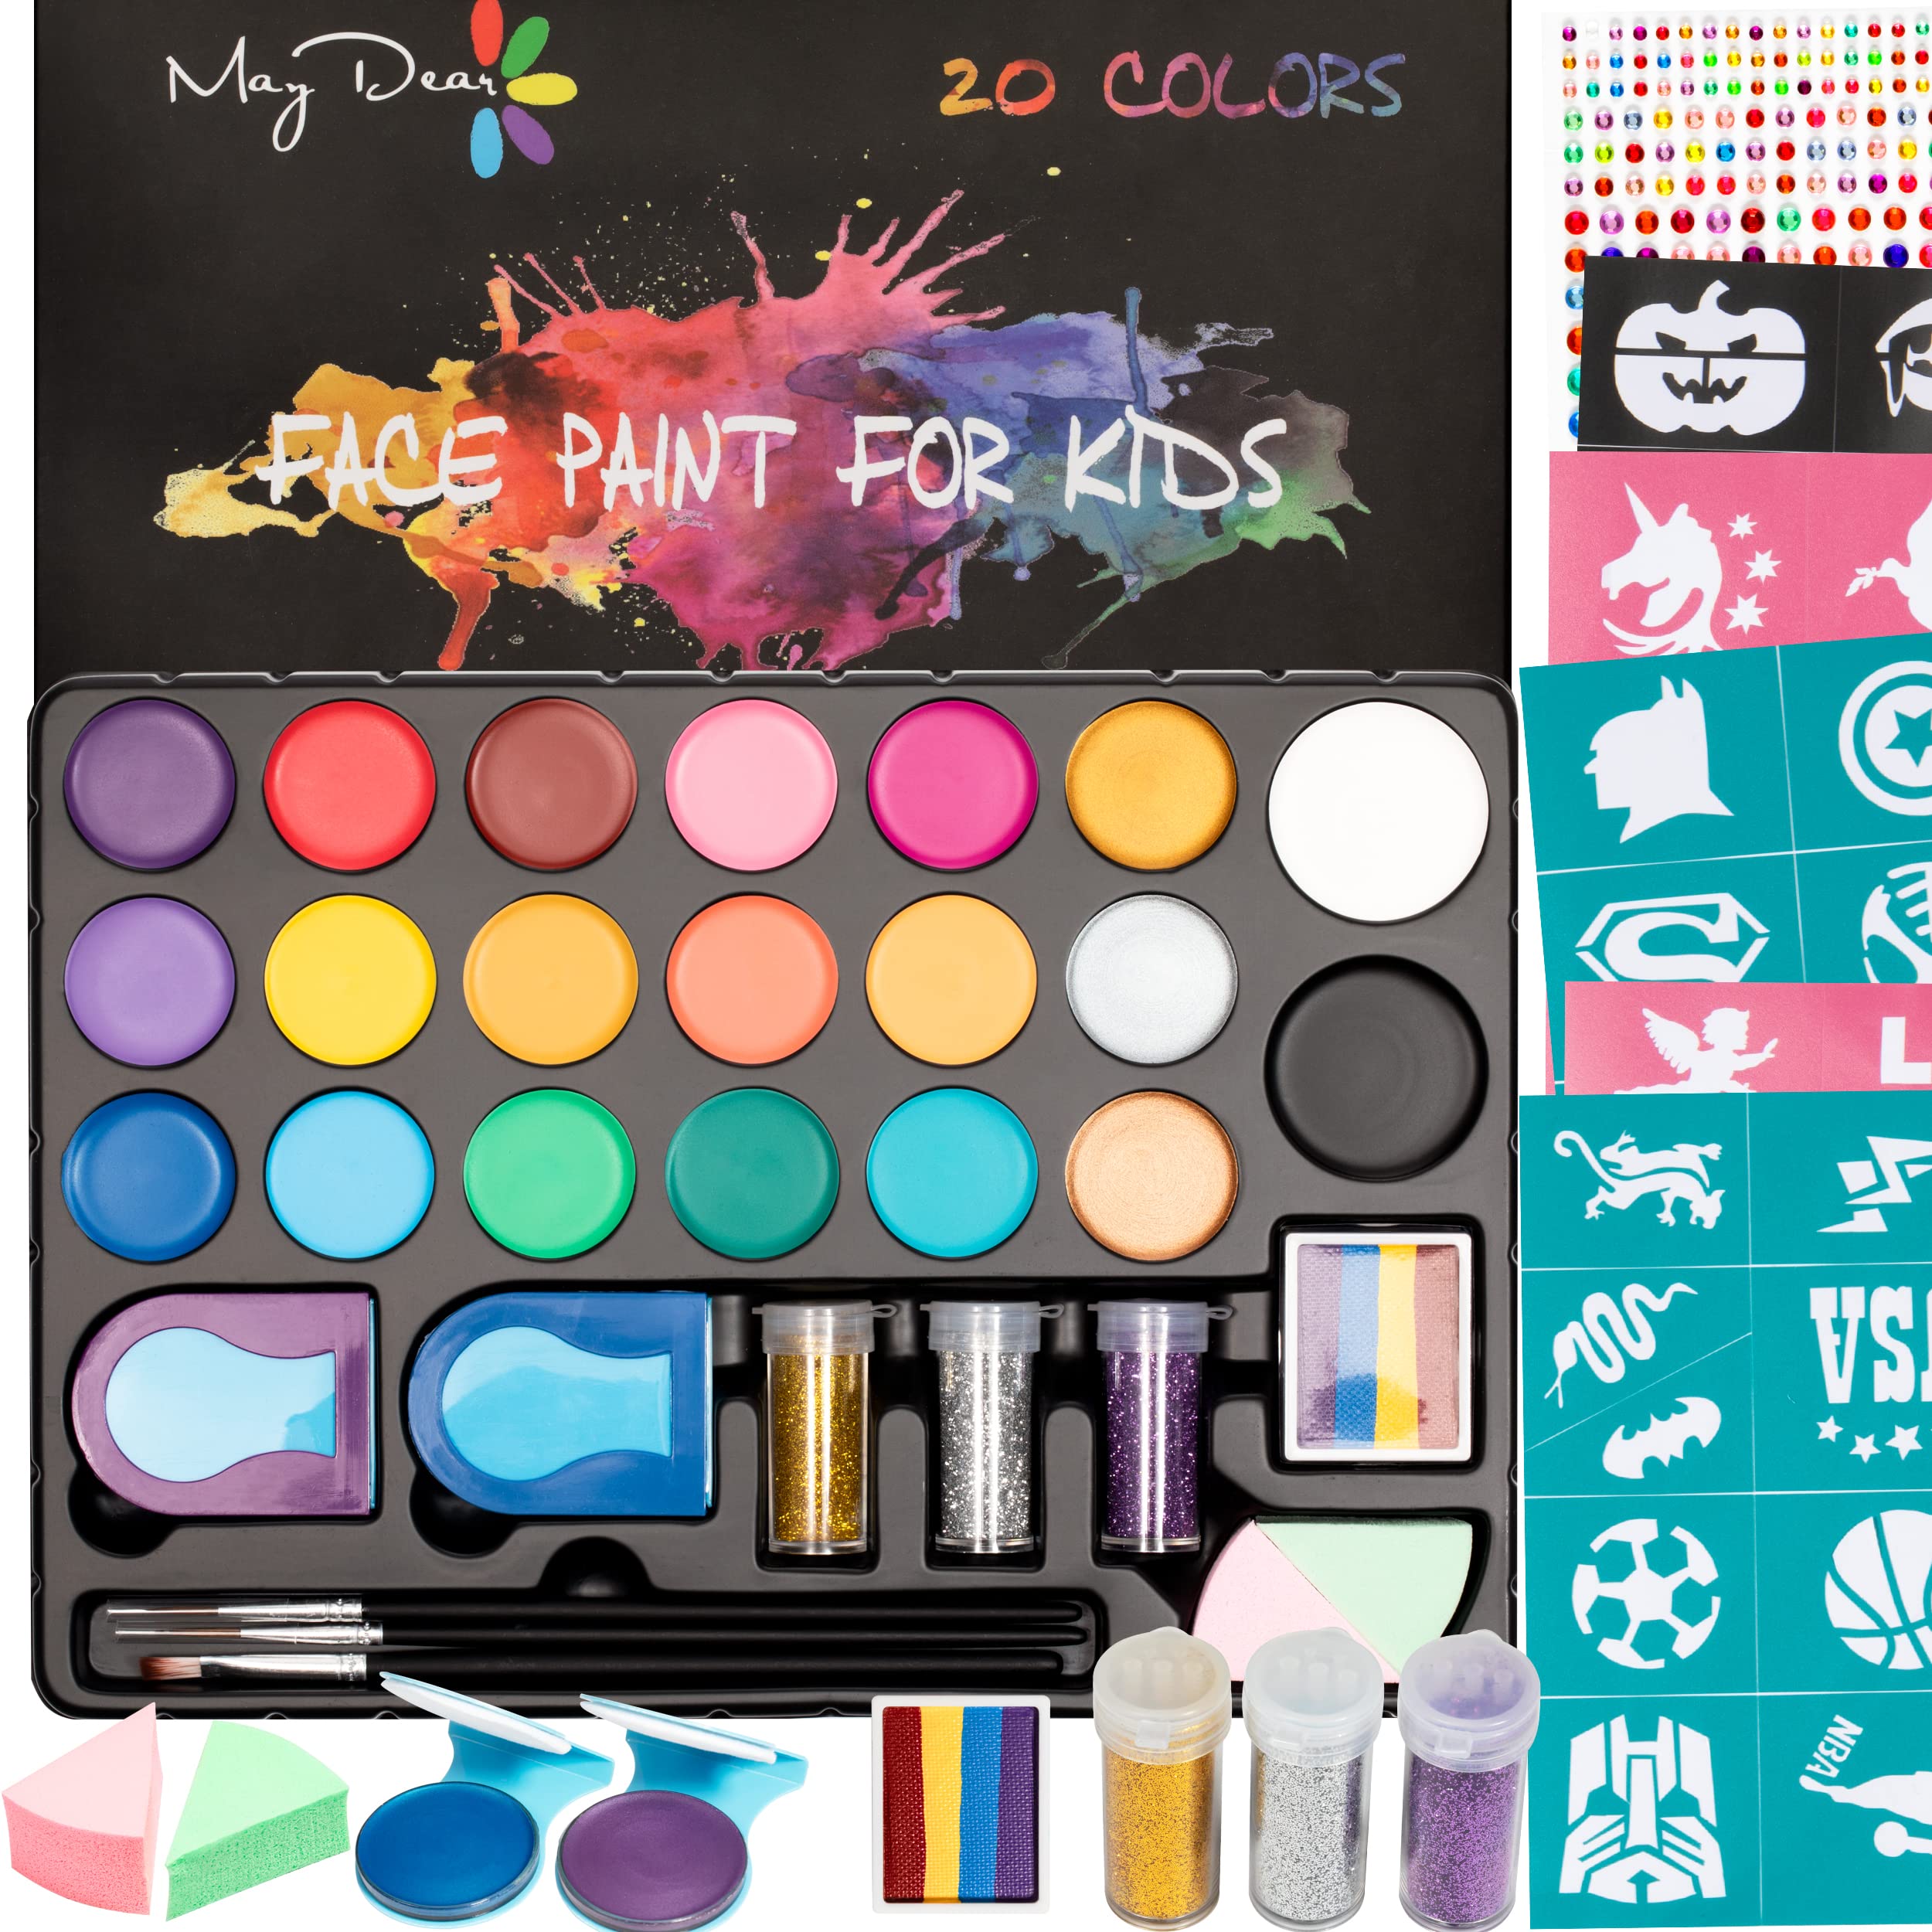 Face Paint Kit for Kids, Professional Quality Face & Body Paint,  Hypoallergenic Safe & Non-Toxic, Easy to Painting and Washing, Ideal for  Halloween